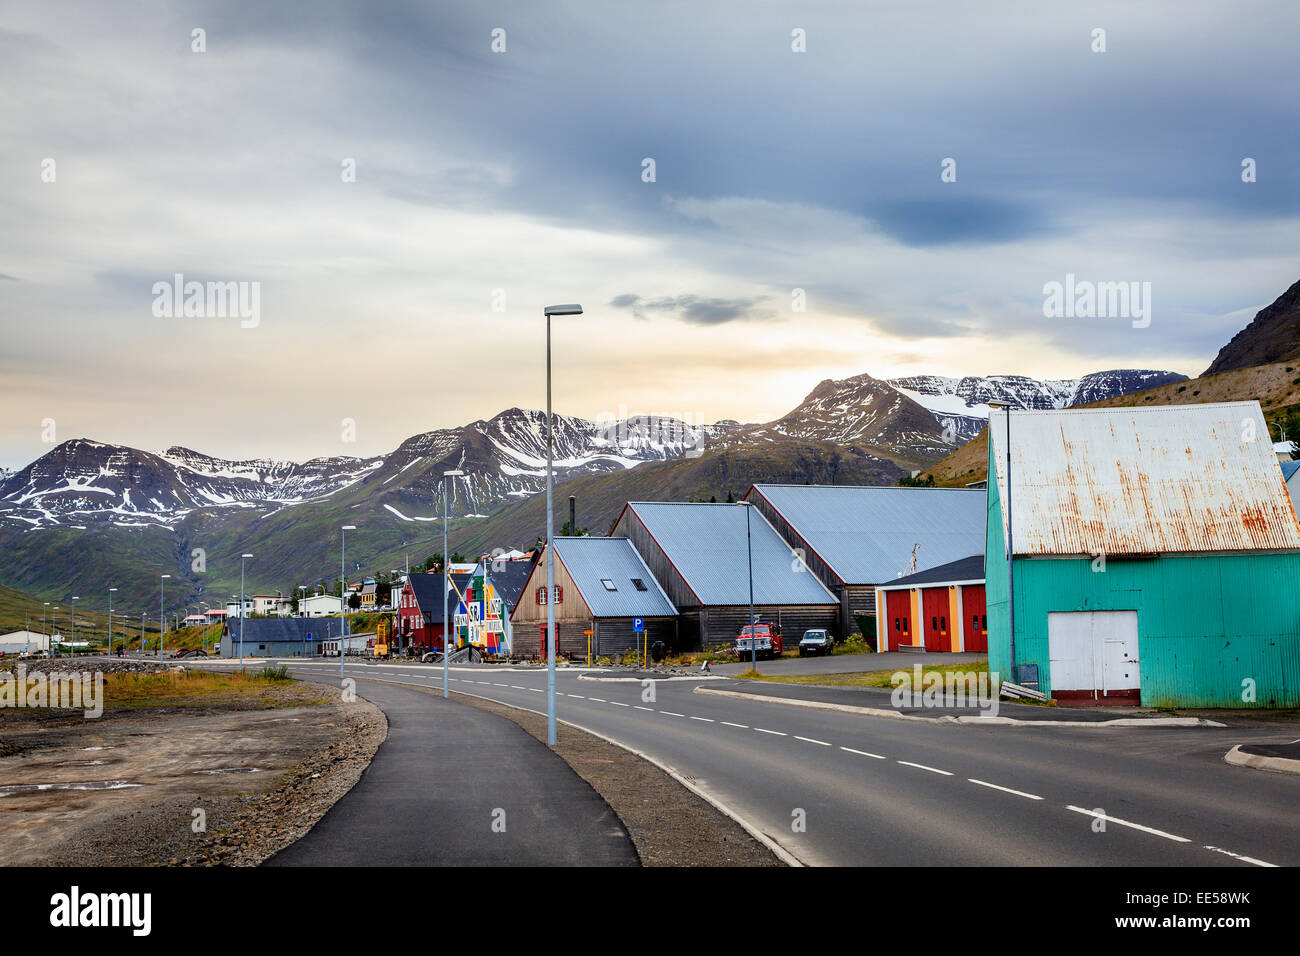 Small fishing town of Siglufjordur on the northern coast of Iceland Stock Photo